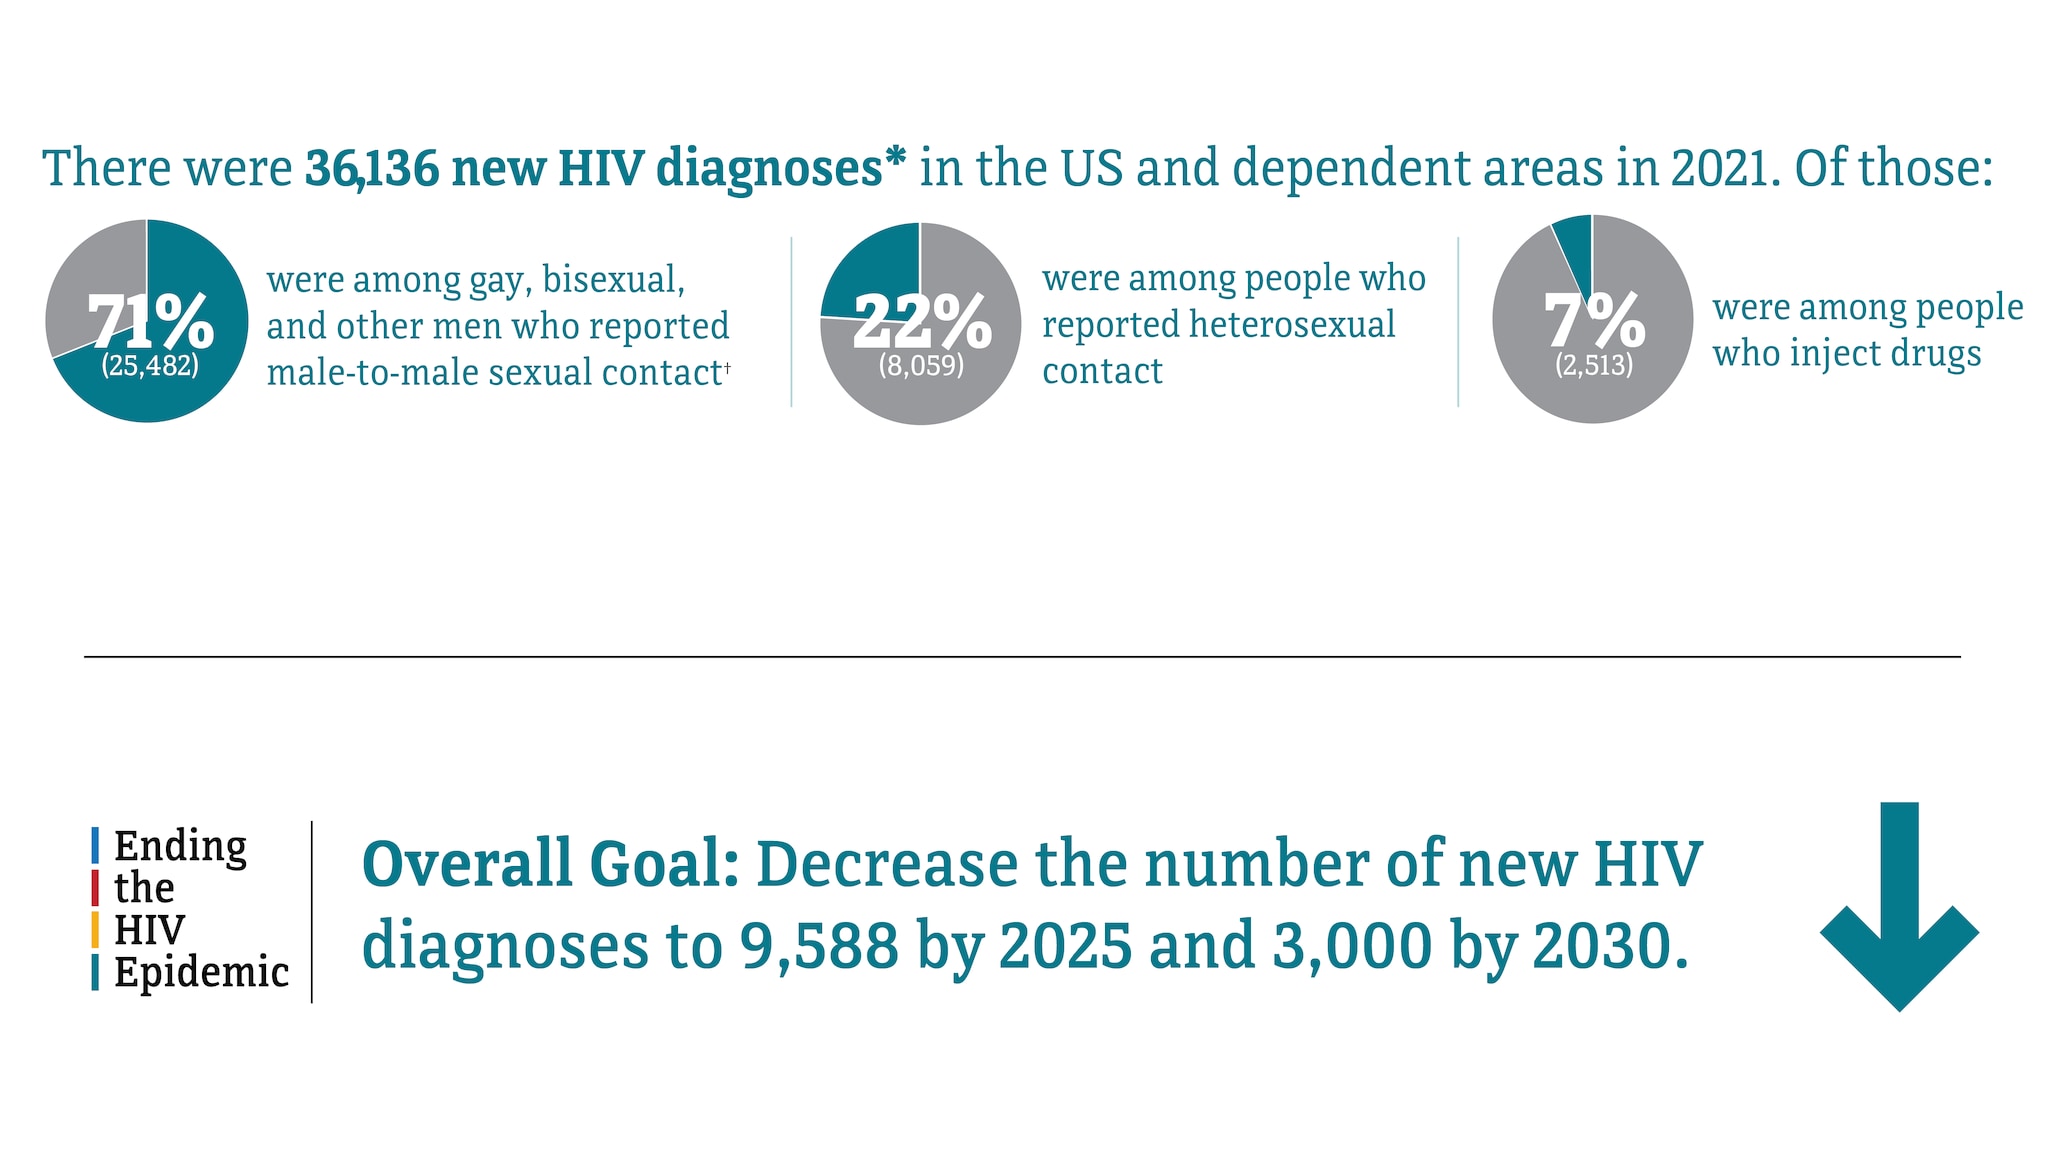 In 2021, there were 36,136 new HIV diagnoses in the US and dependent areas. Of those, 71 percent were among gay, bisexual, and other men who reported male-to-male sexual contact, 22 percent were among people who reported heterosexual contact, and 7 percent were among people who inject drugs. The Ending the HIV Epidemic overall goal is to decrease the number of new HIV diagnoses to 9,588 by 2025 and 3,000 by 2030.